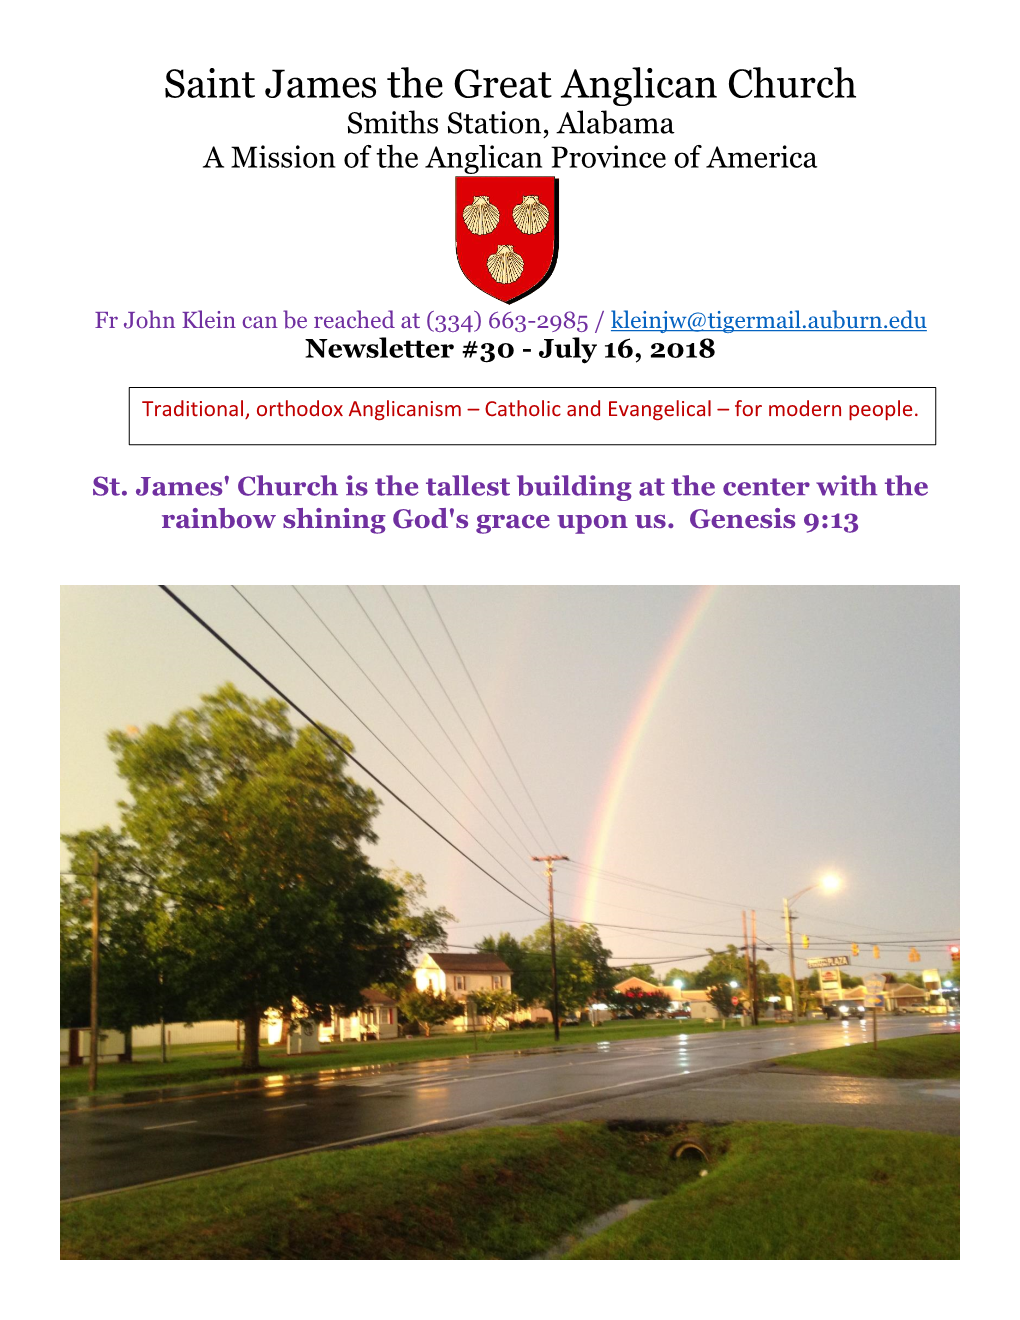 Saint James the Great Anglican Church Smiths Station, Alabama a Mission of the Anglican Province of America